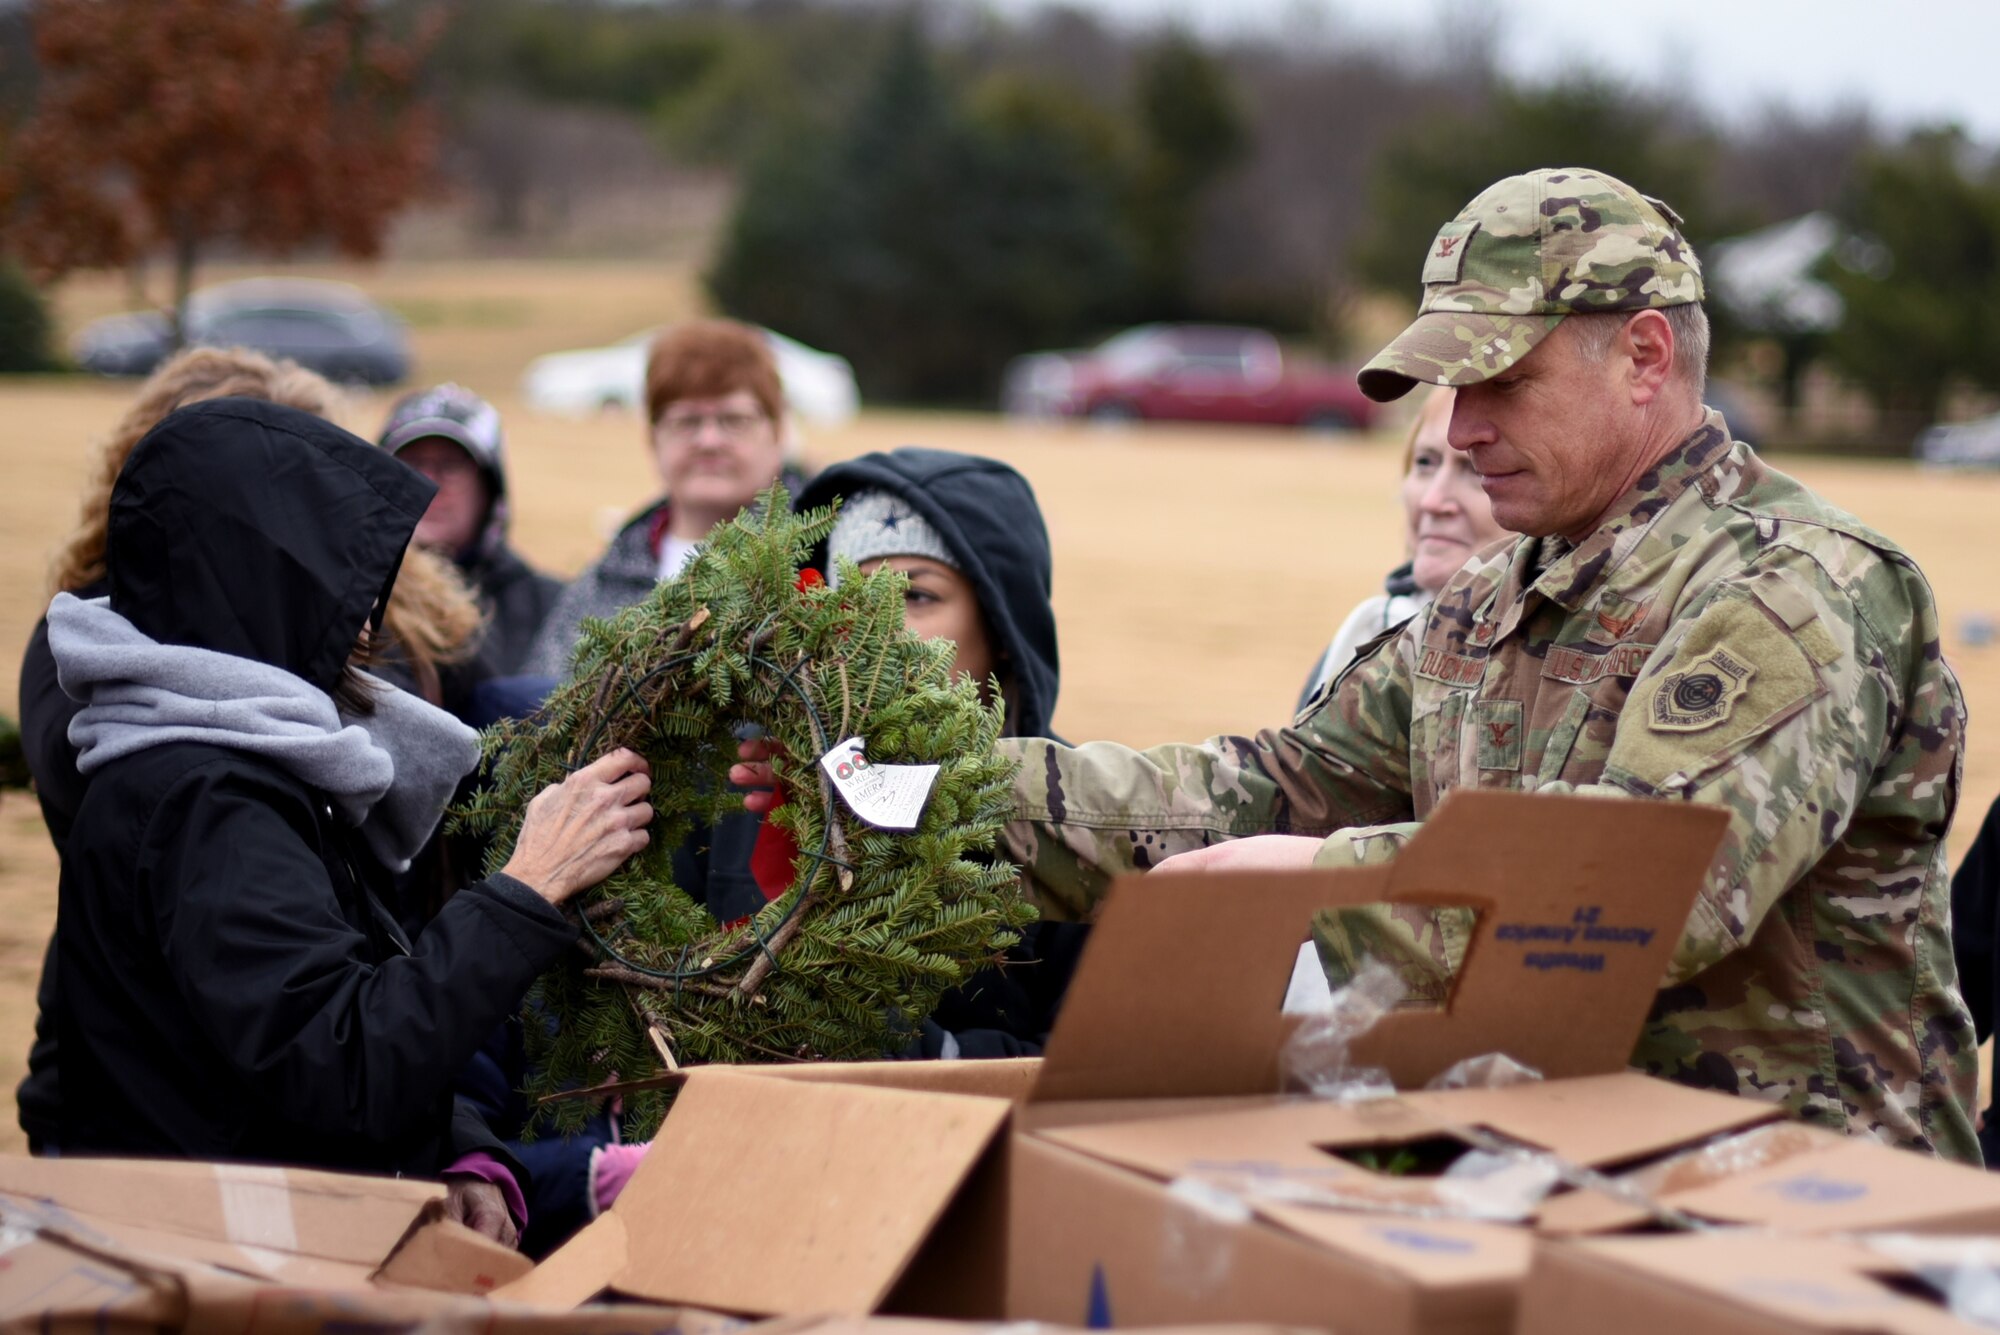 Col. Allen “Jaks” Duckworth, 301st Fighter Wing commander, distributes wreaths during a Wreaths Across America event at the Dallas-Fort Worth National Cemetery on Dec. 18, 2021. Airmen from the 301 FW participated to remember and honor their fellow service men and women. (U.S. Air Force photo by Staff Sgt. Randall Moose)